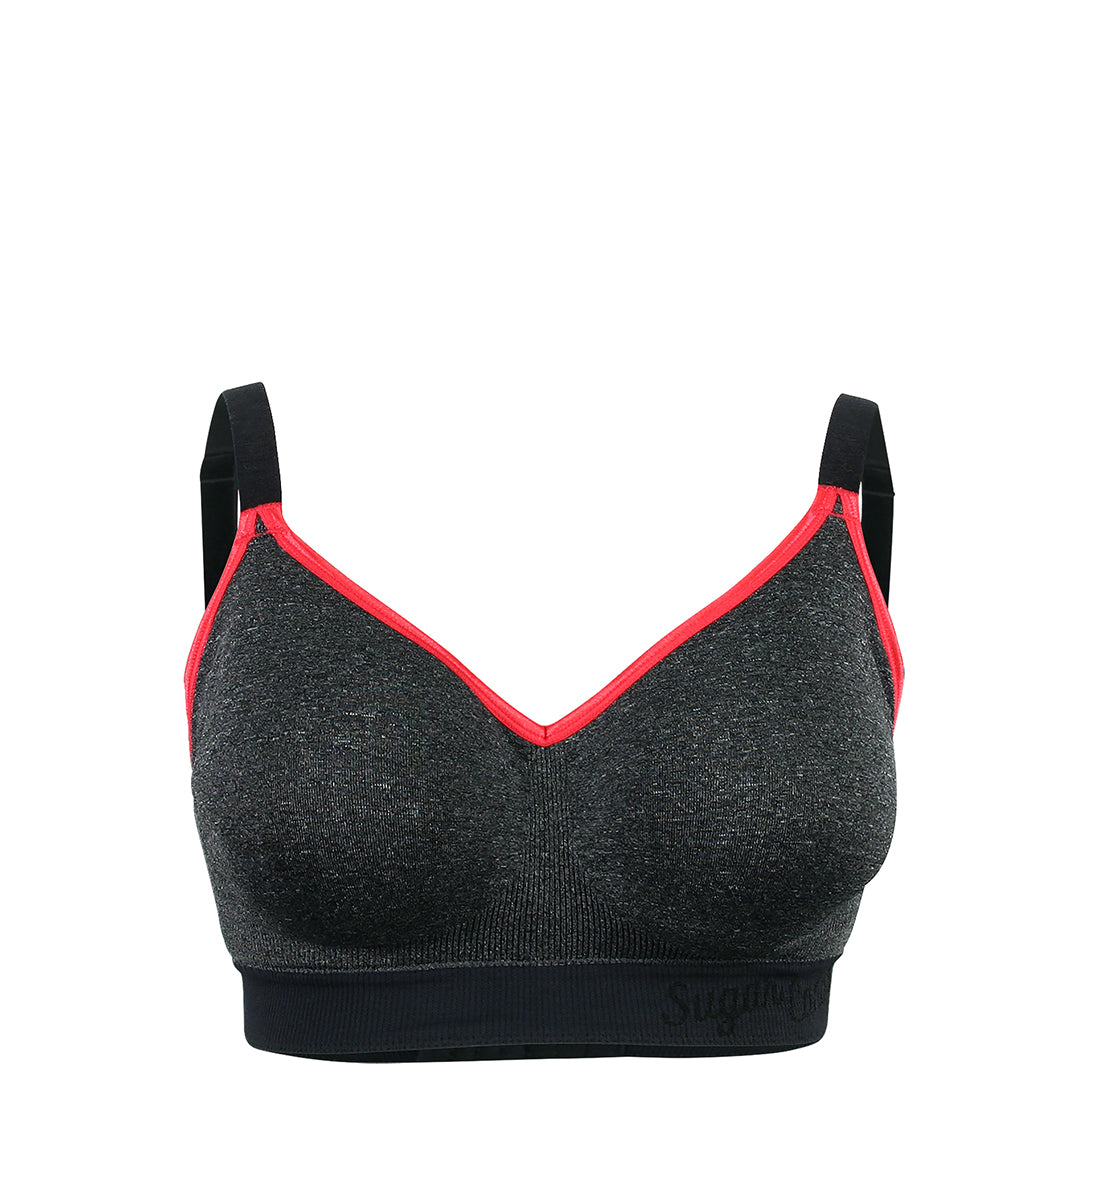 Sugar Candy by Cake Crush Seamless Fuller Bust Everyday Softcup G-L Cups (28-8008),XS,Charcoal - Charcoal,XS